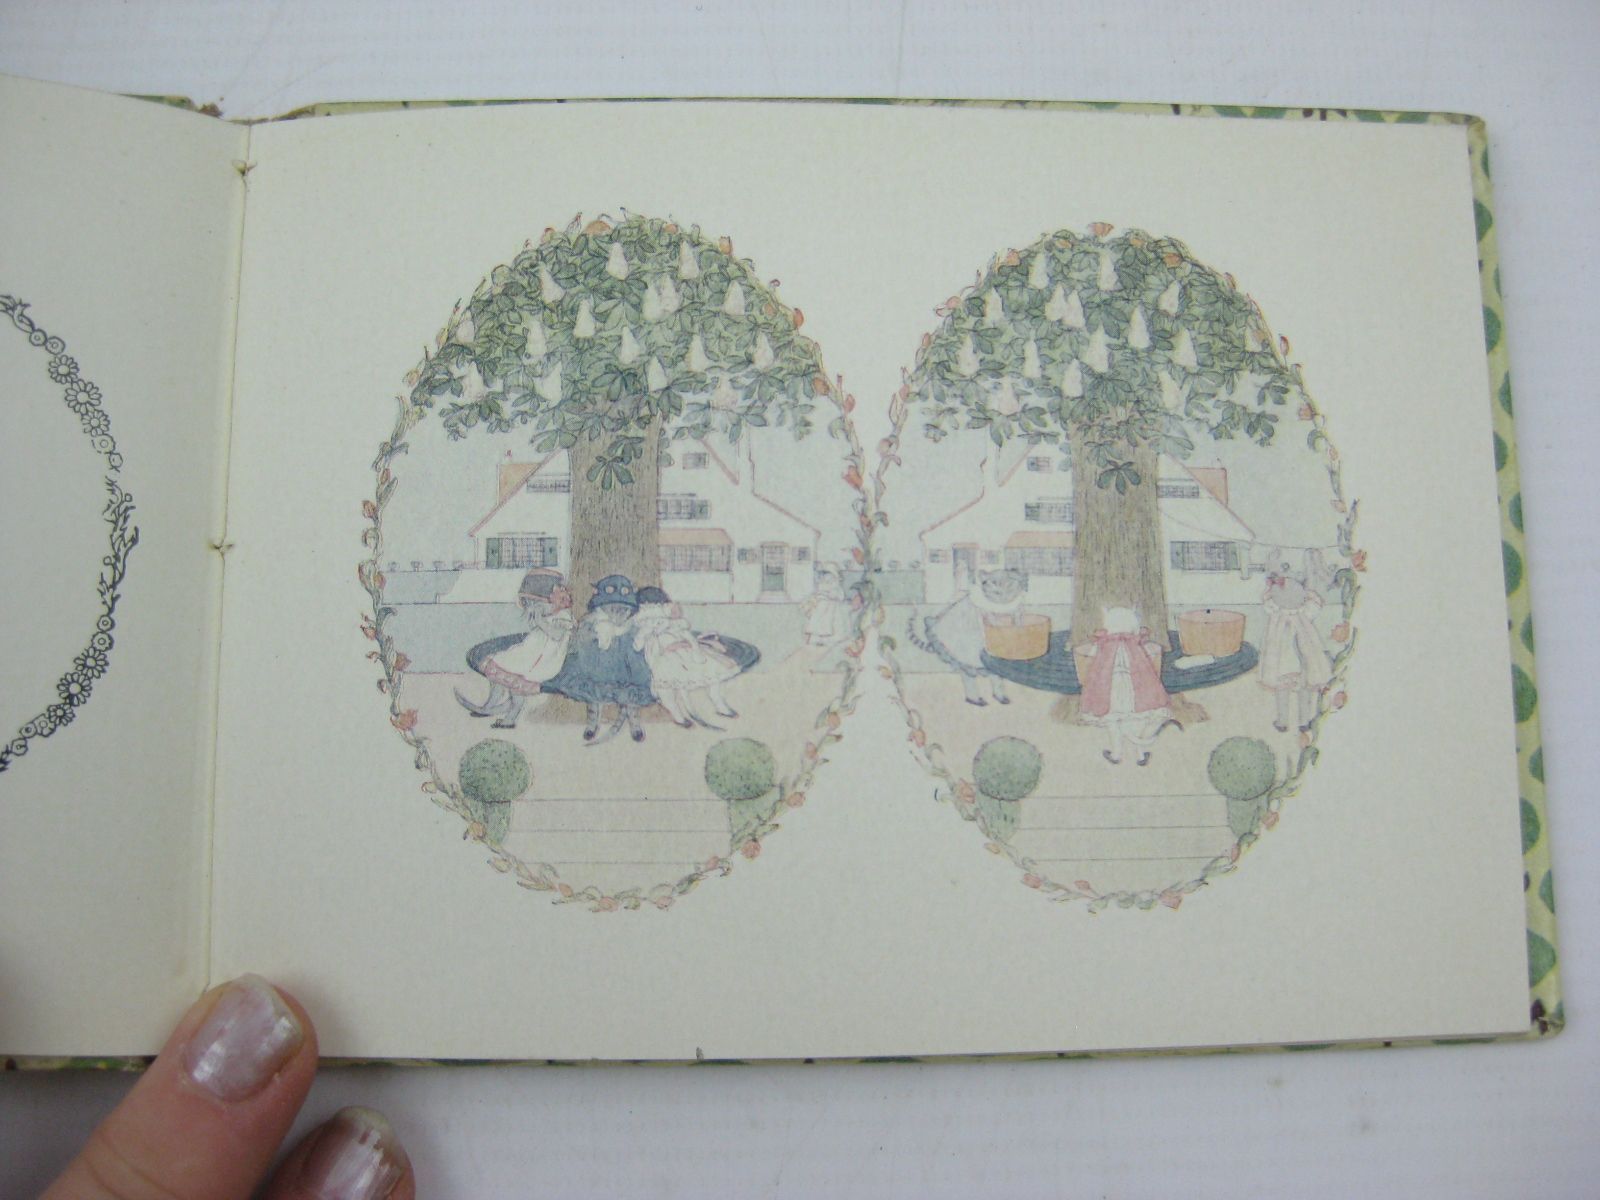 Photo of BABY'S LITTLE RHYME BOOK illustrated by Willebeek Le Mair, Henriette published by Augener Ltd. (STOCK CODE: 1507460)  for sale by Stella & Rose's Books